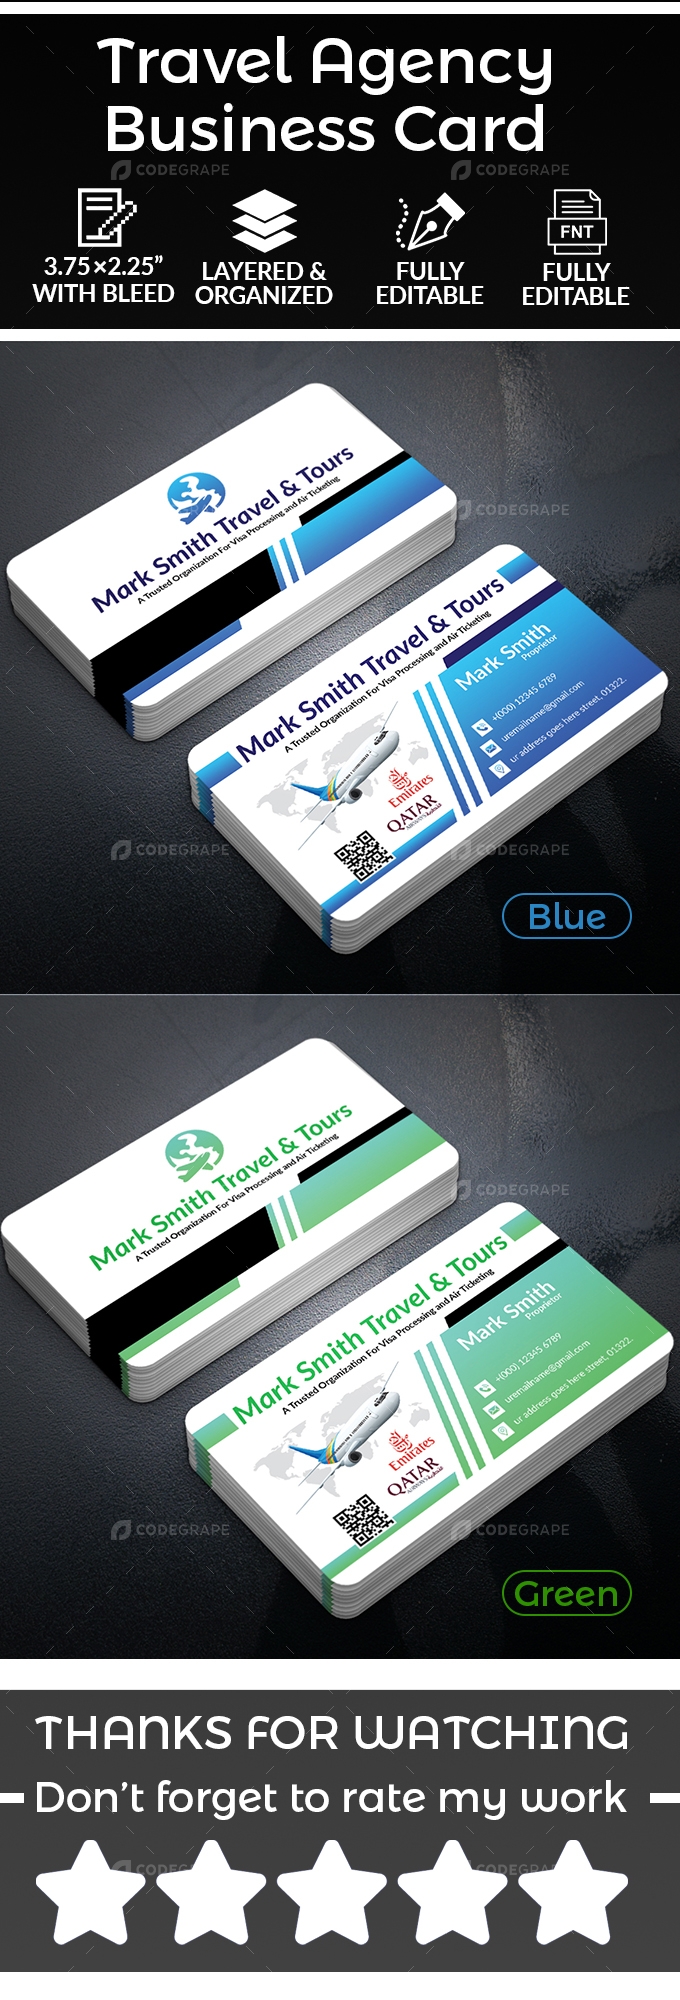 Travel Agency Business card